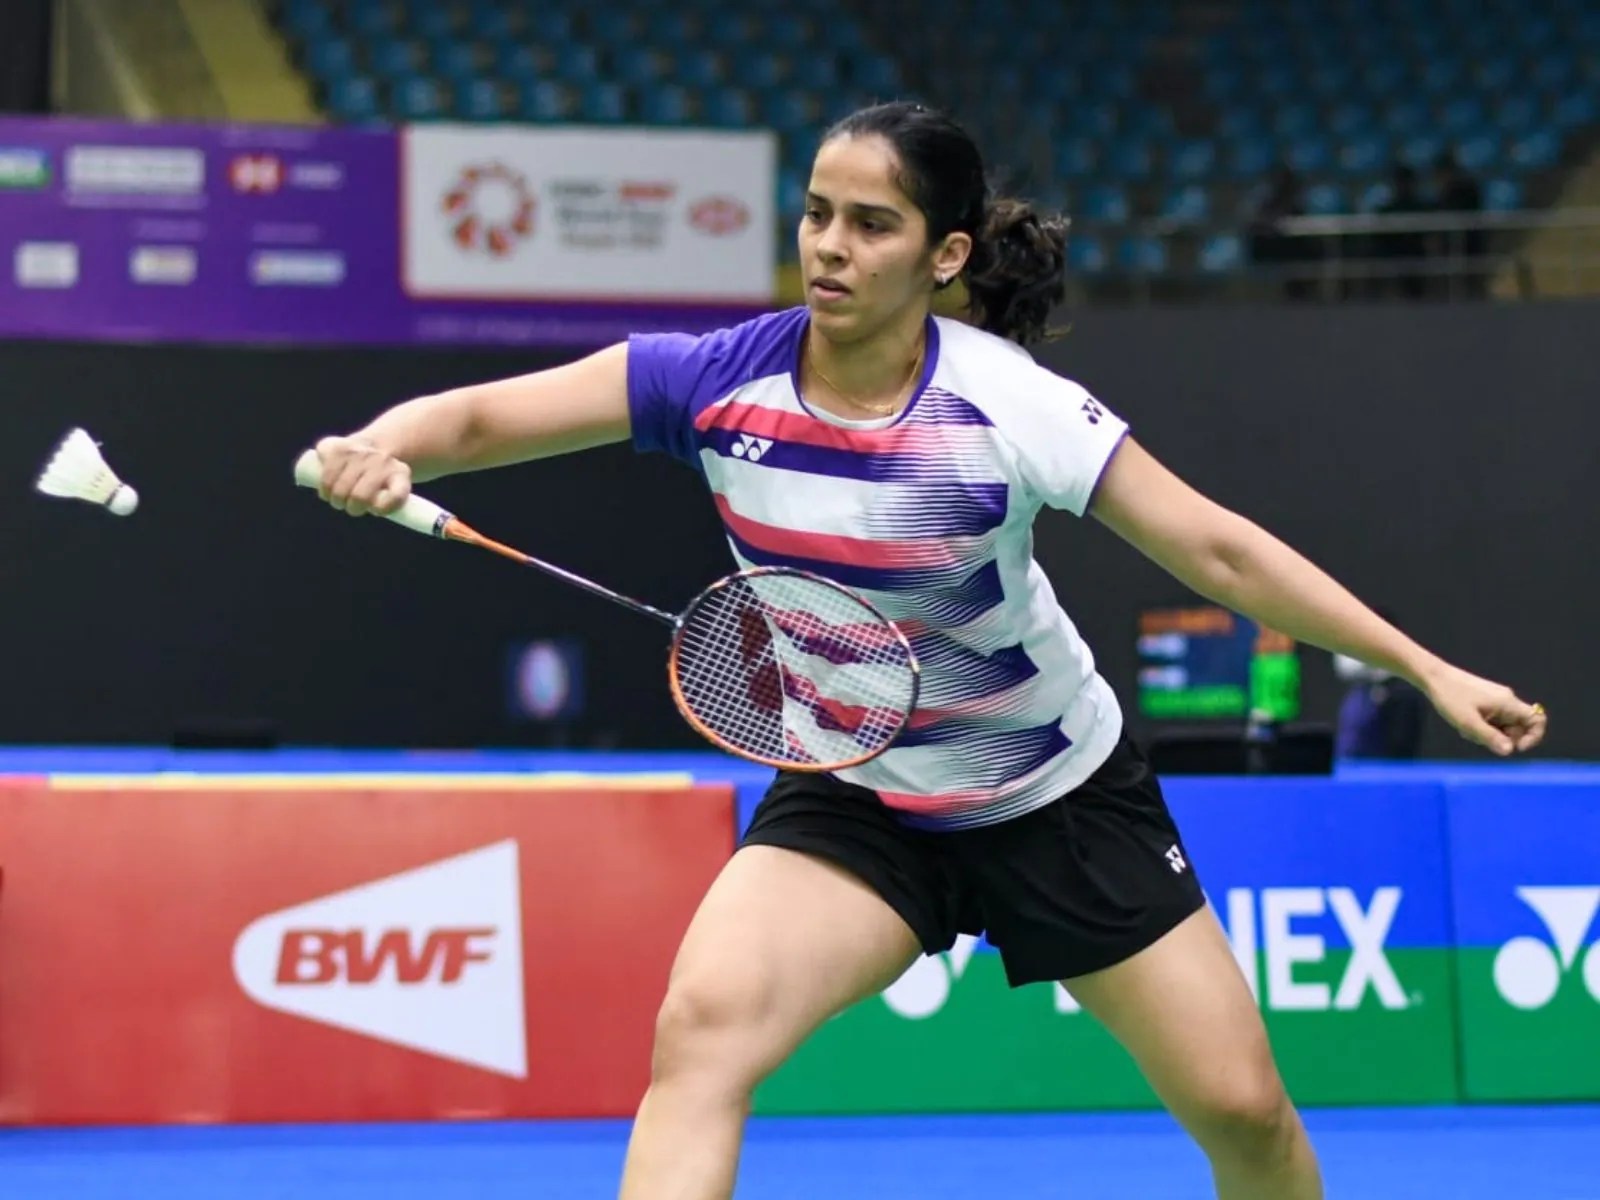 Hylo Open Badminton LIVE: HS Prannoy faces Shesar Rhutsavito in first round of Hylo Open at 3.40 PM, Kidambi Srikanth, Saina Nehwal and Men's Doubles pair Chirag-Satwik too set to begin campaign - Follow LIVE updates 